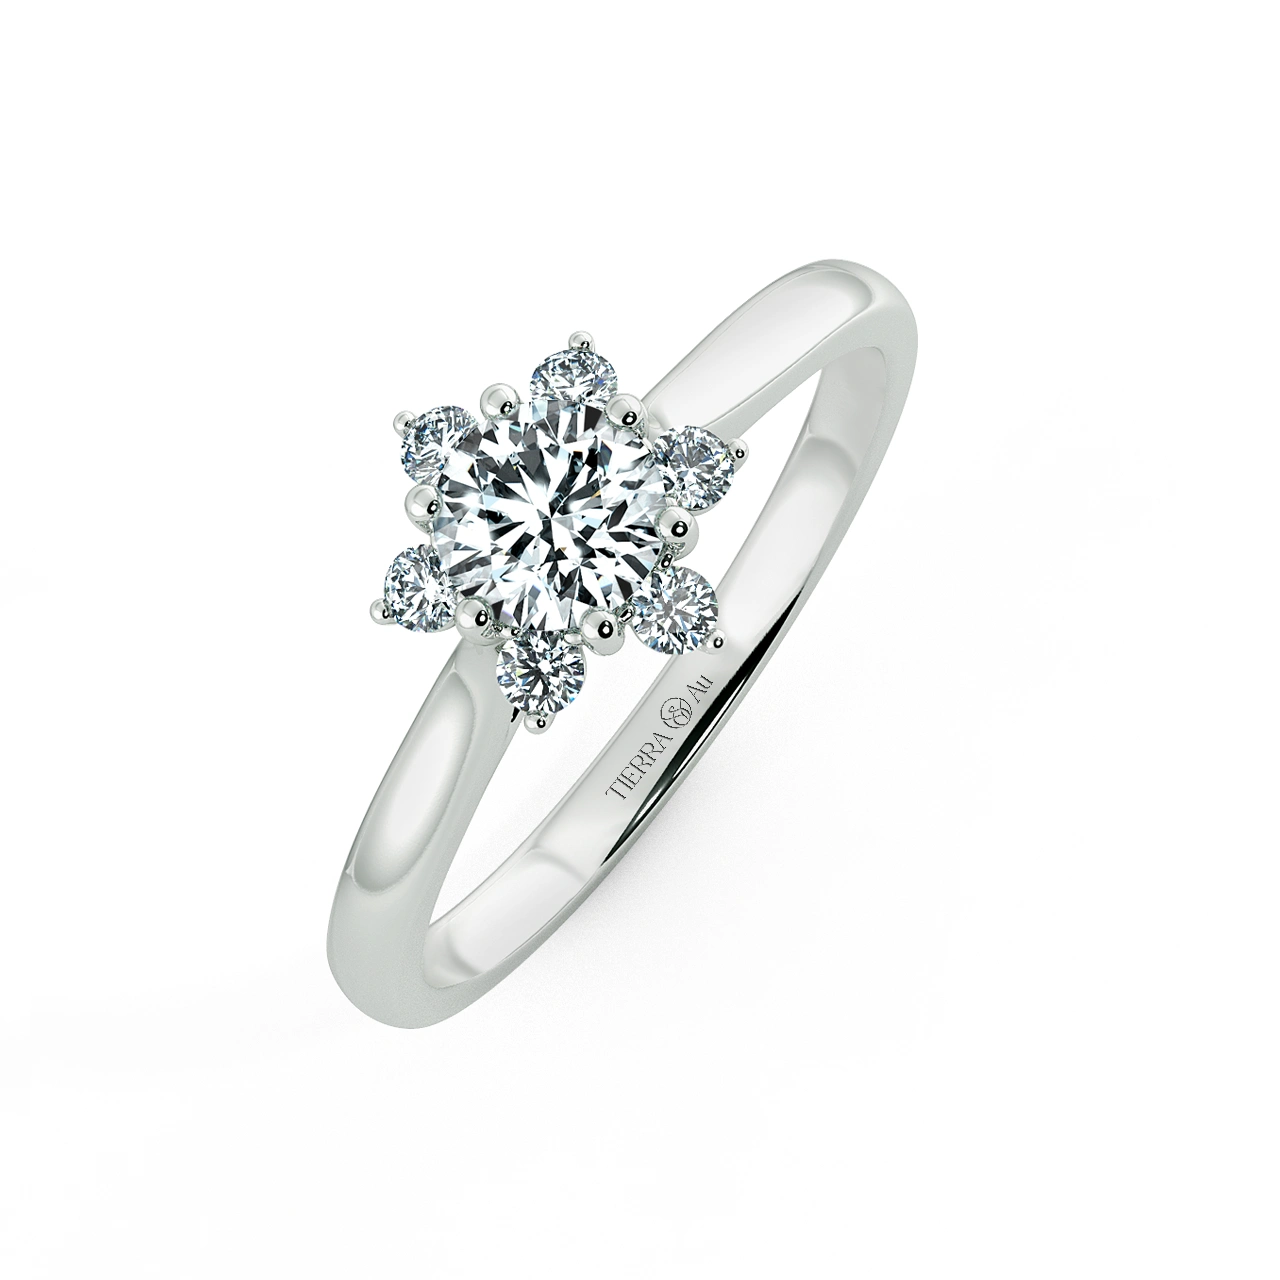 Small Halo Snowflake Engagement Ring with Shiny Band NCH2001 3